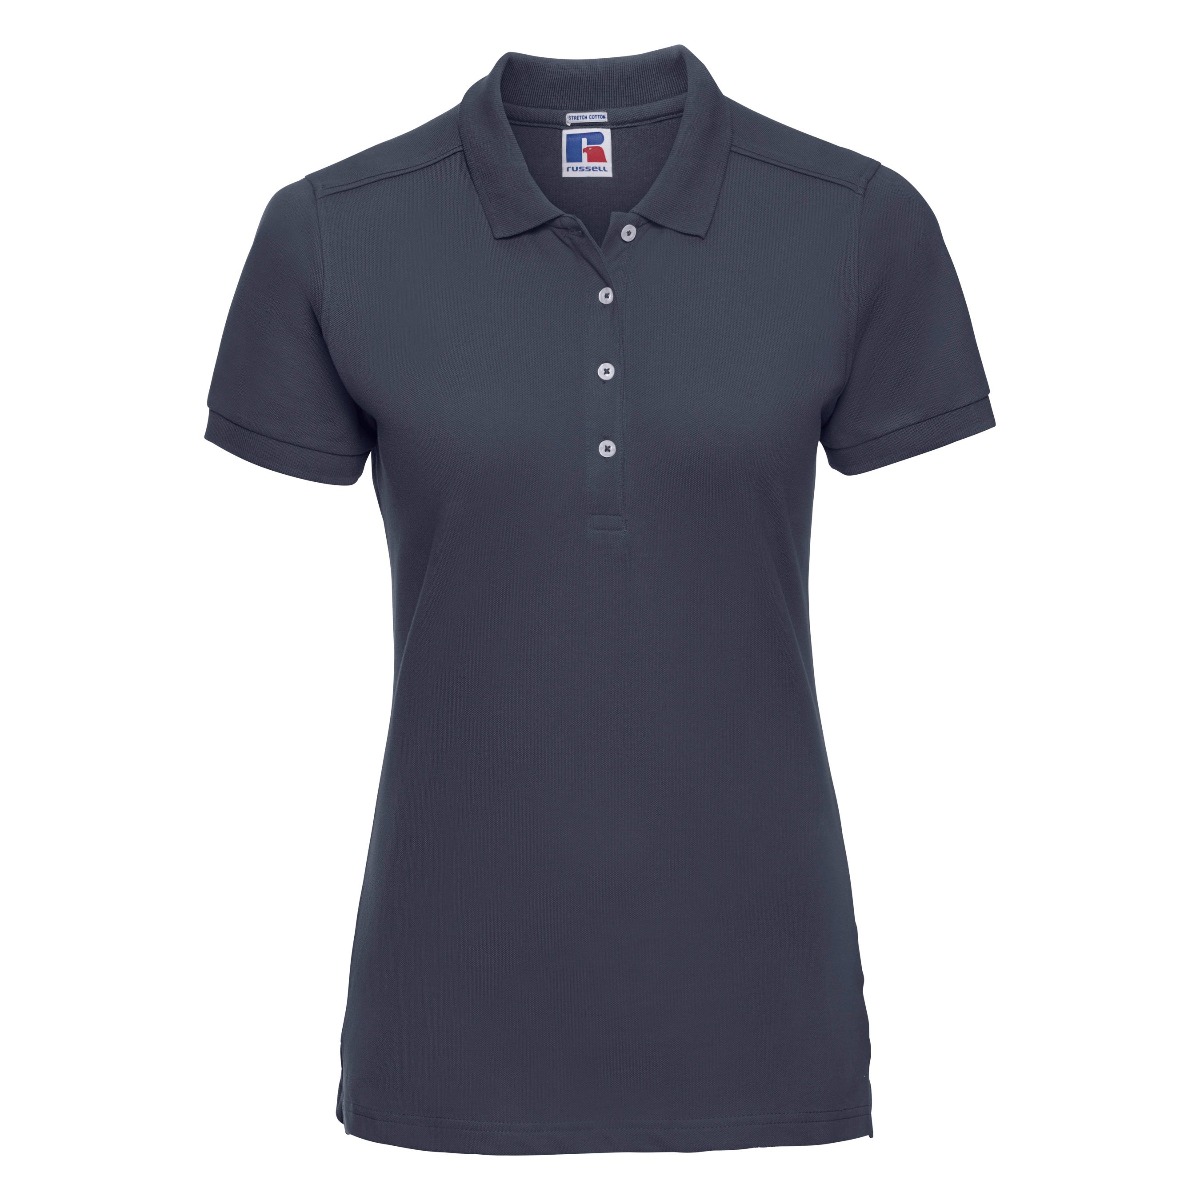 ax-httpswebsystems.s3.amazonaws.comtmp_for_downloadrussell-womens-stretch-french-navy_3.jpg